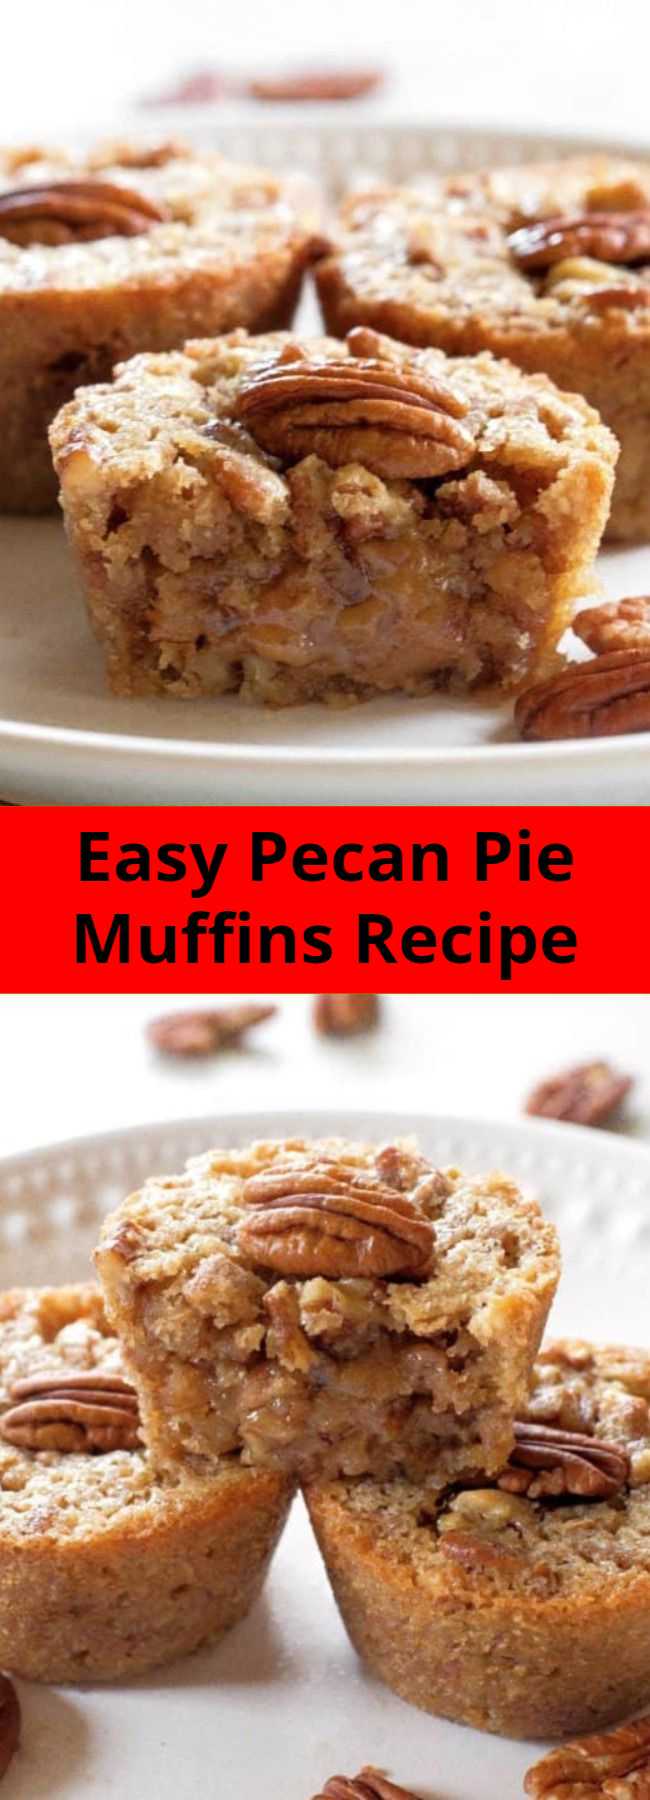 Easy Pecan Pie Muffins Recipe - These Pecan Pie Muffins are a mix between a pie and a muffin. They have a muffin texture with a soft gooey inside like a mini Southern pecan pie. This recipe is one of the highest used recipes during the fall especially for Thanksgiving!